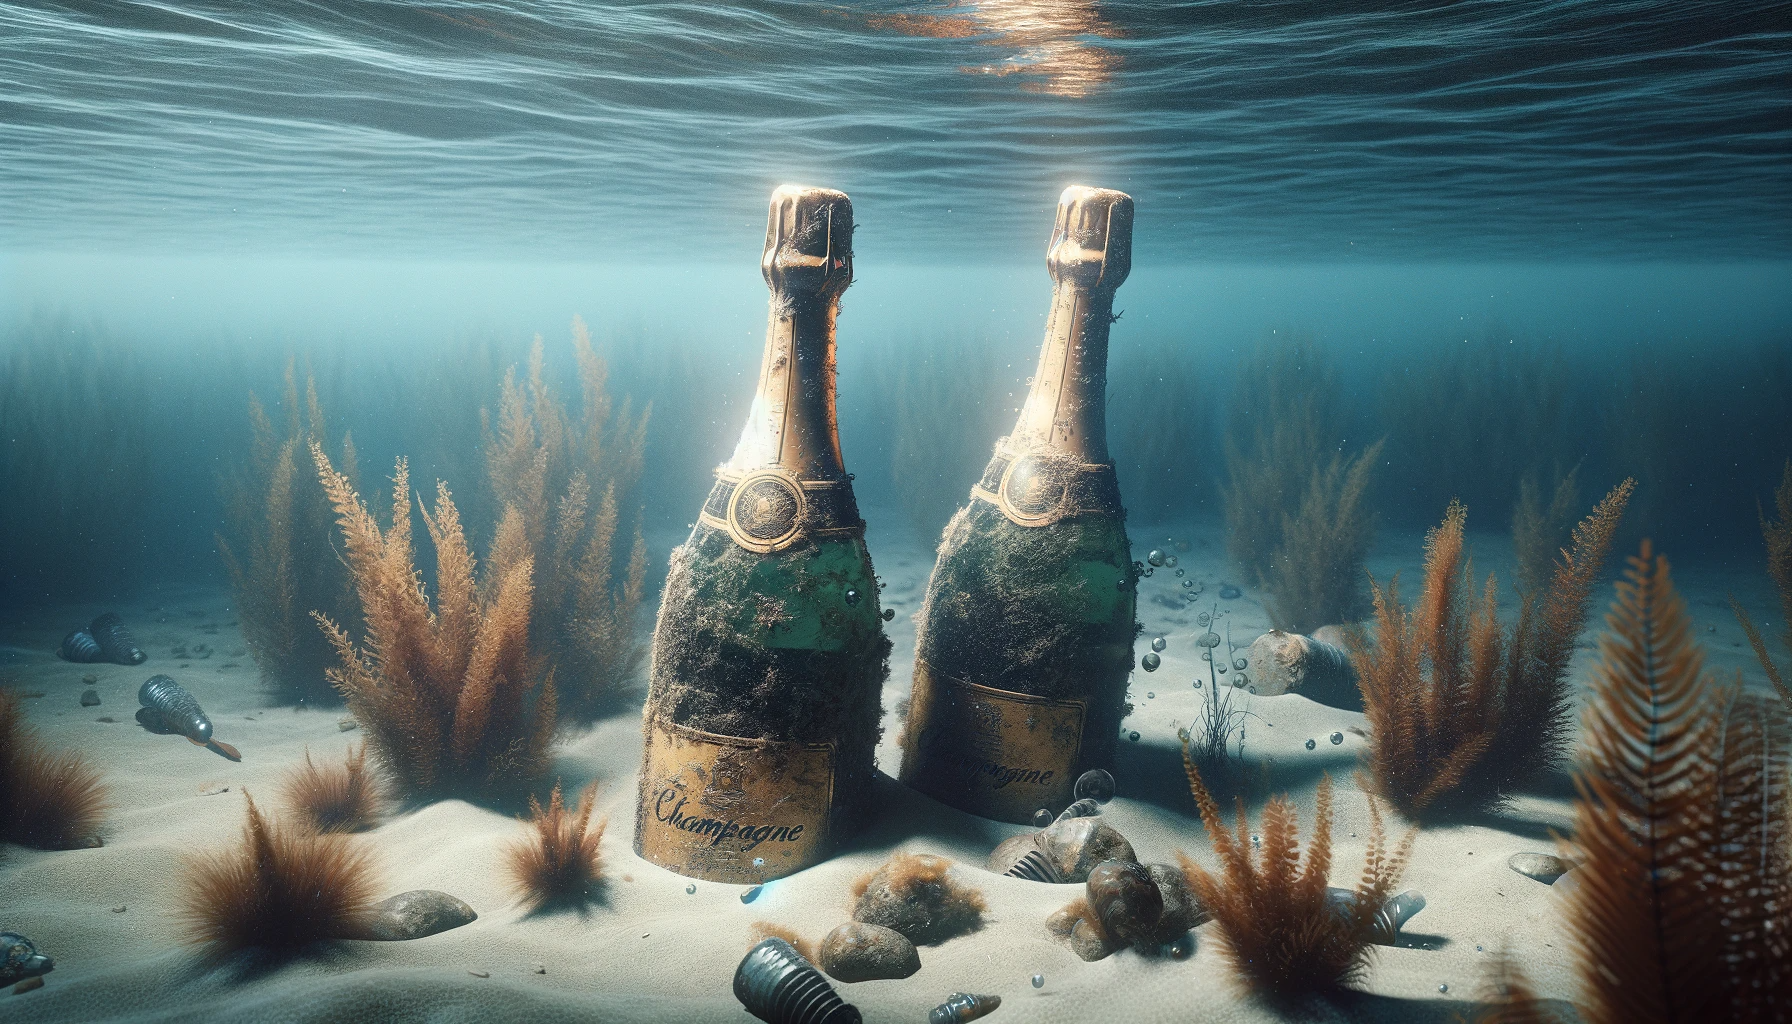 champagne-bottles-found-in-170-year-old-shipwreck-open-new-avenues-for-winemaking